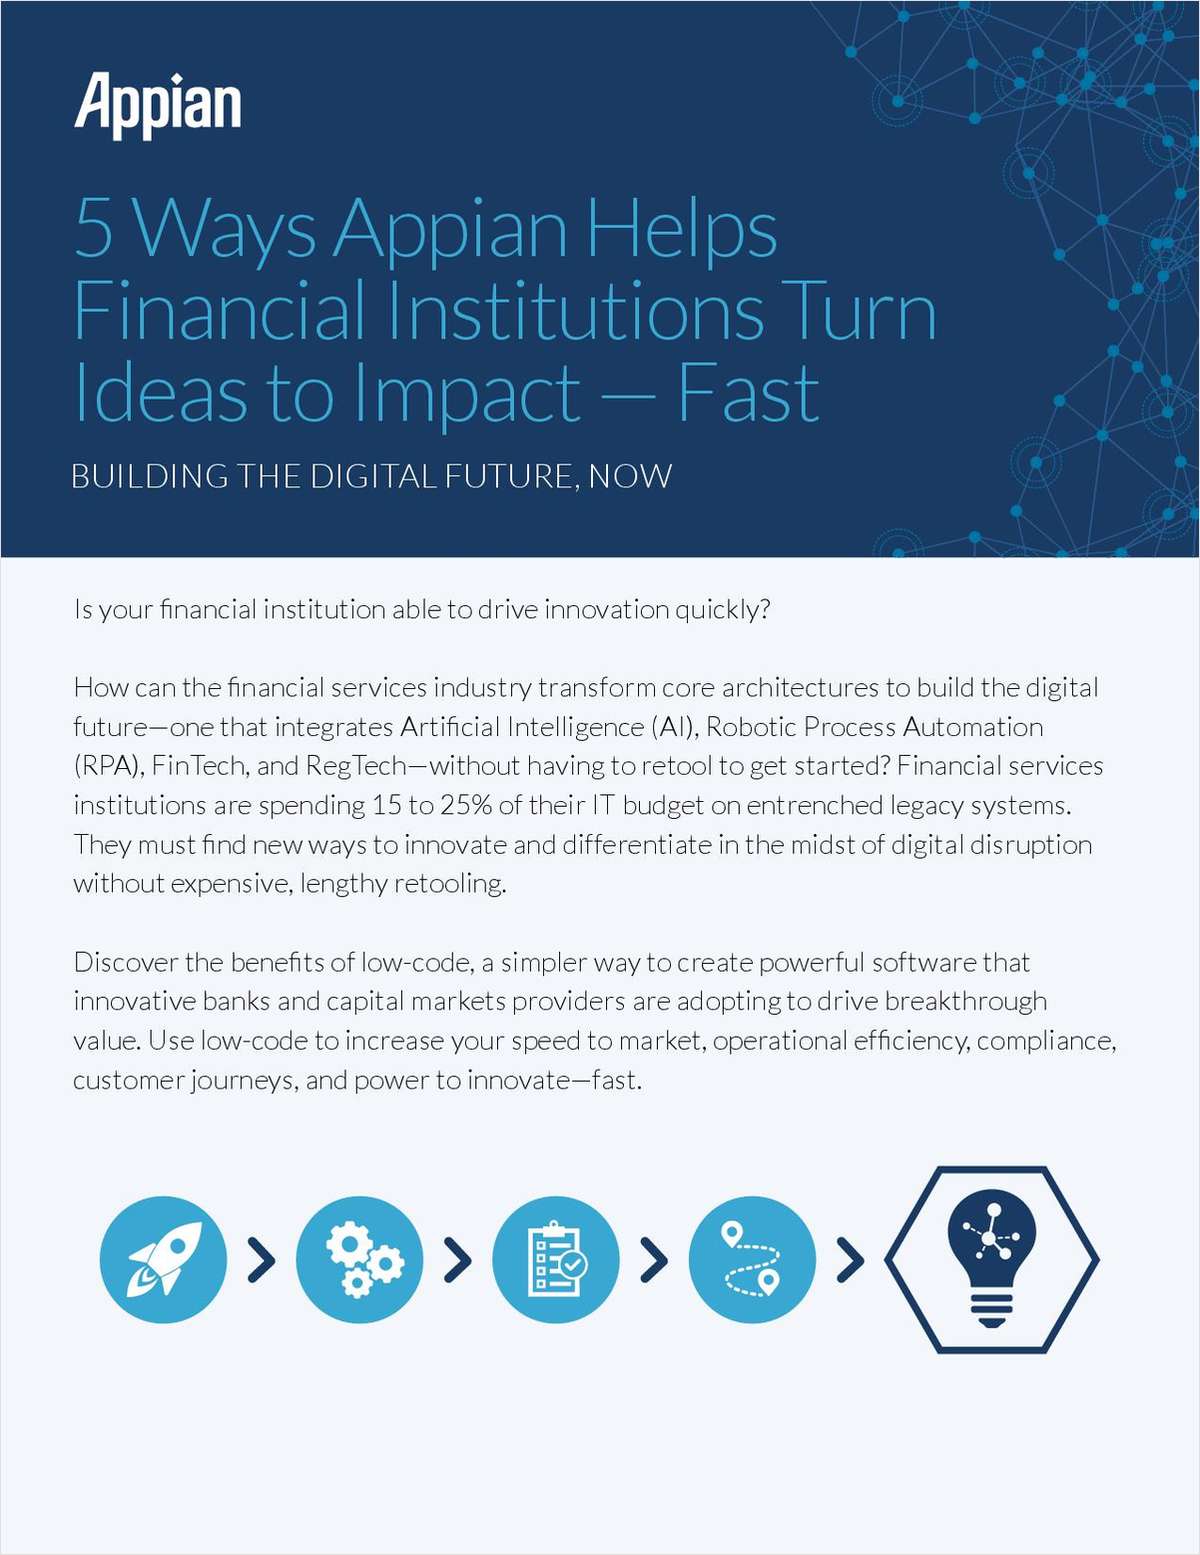 Five Ways Appian Helps Financial Institutions Turn Ideas to Impact -- Fast